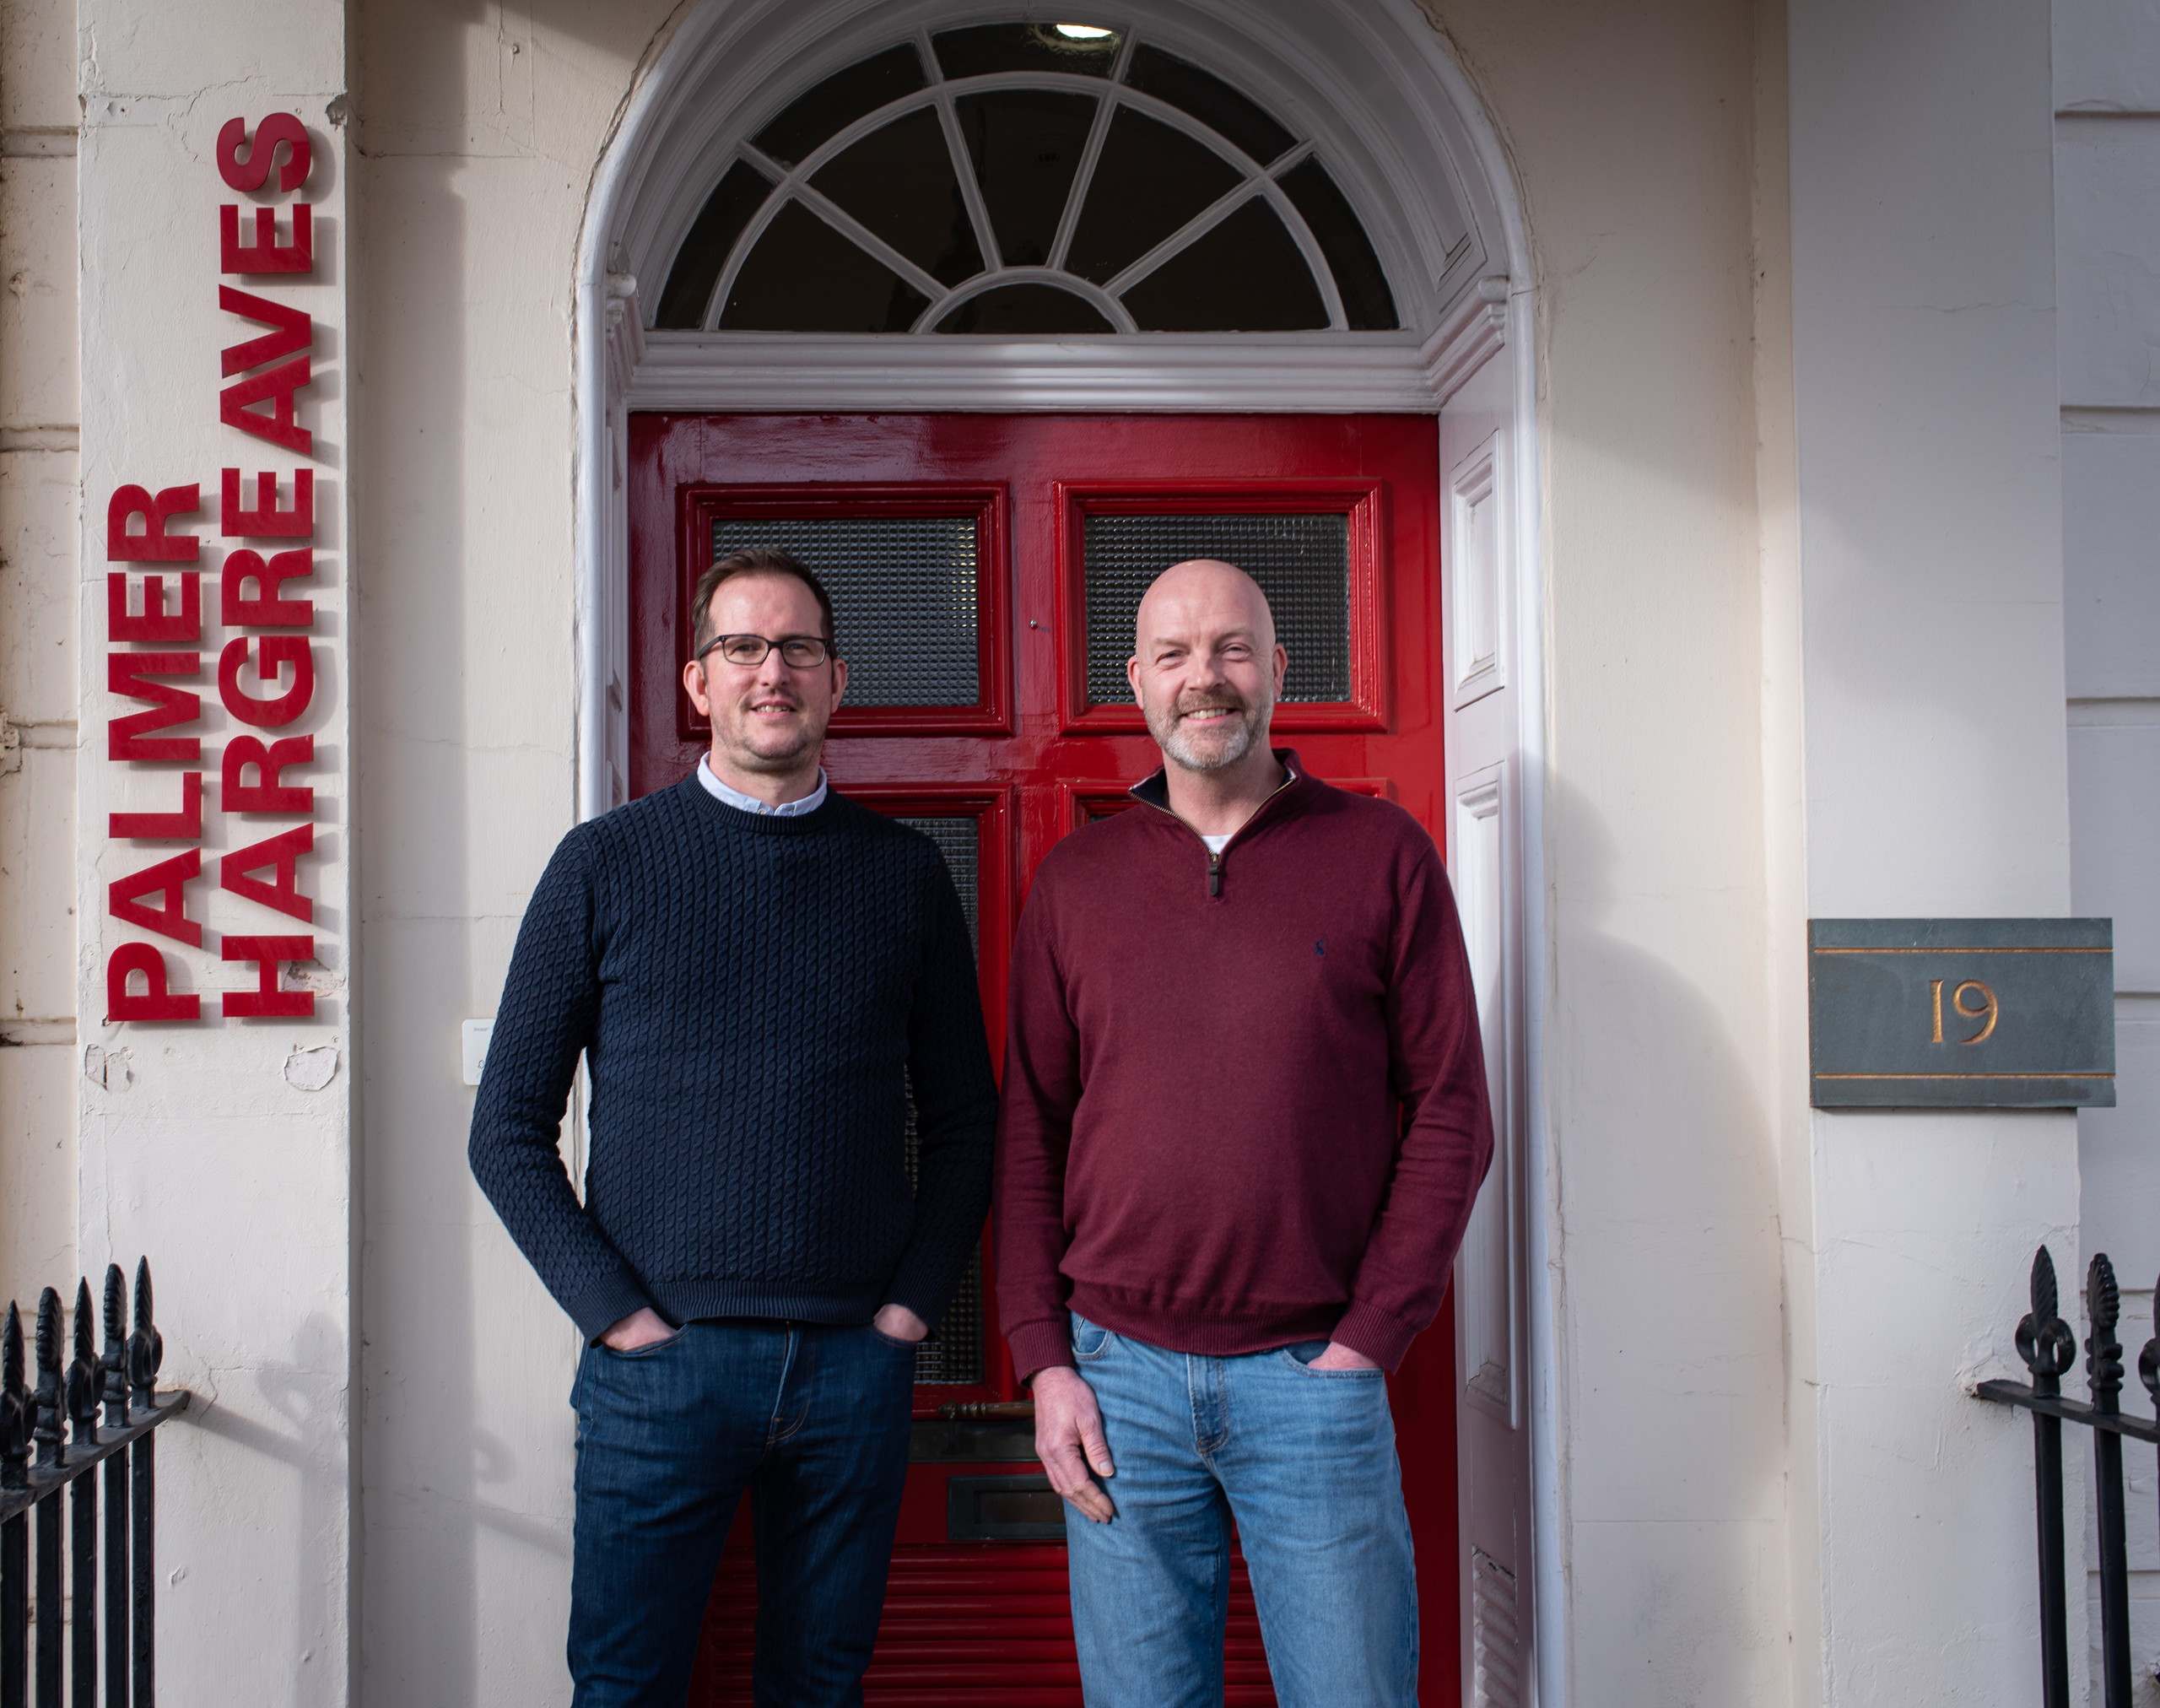 Simon Tierney, Manager Director, and Mark Dale, Director International Business at Palmer Hargreaves